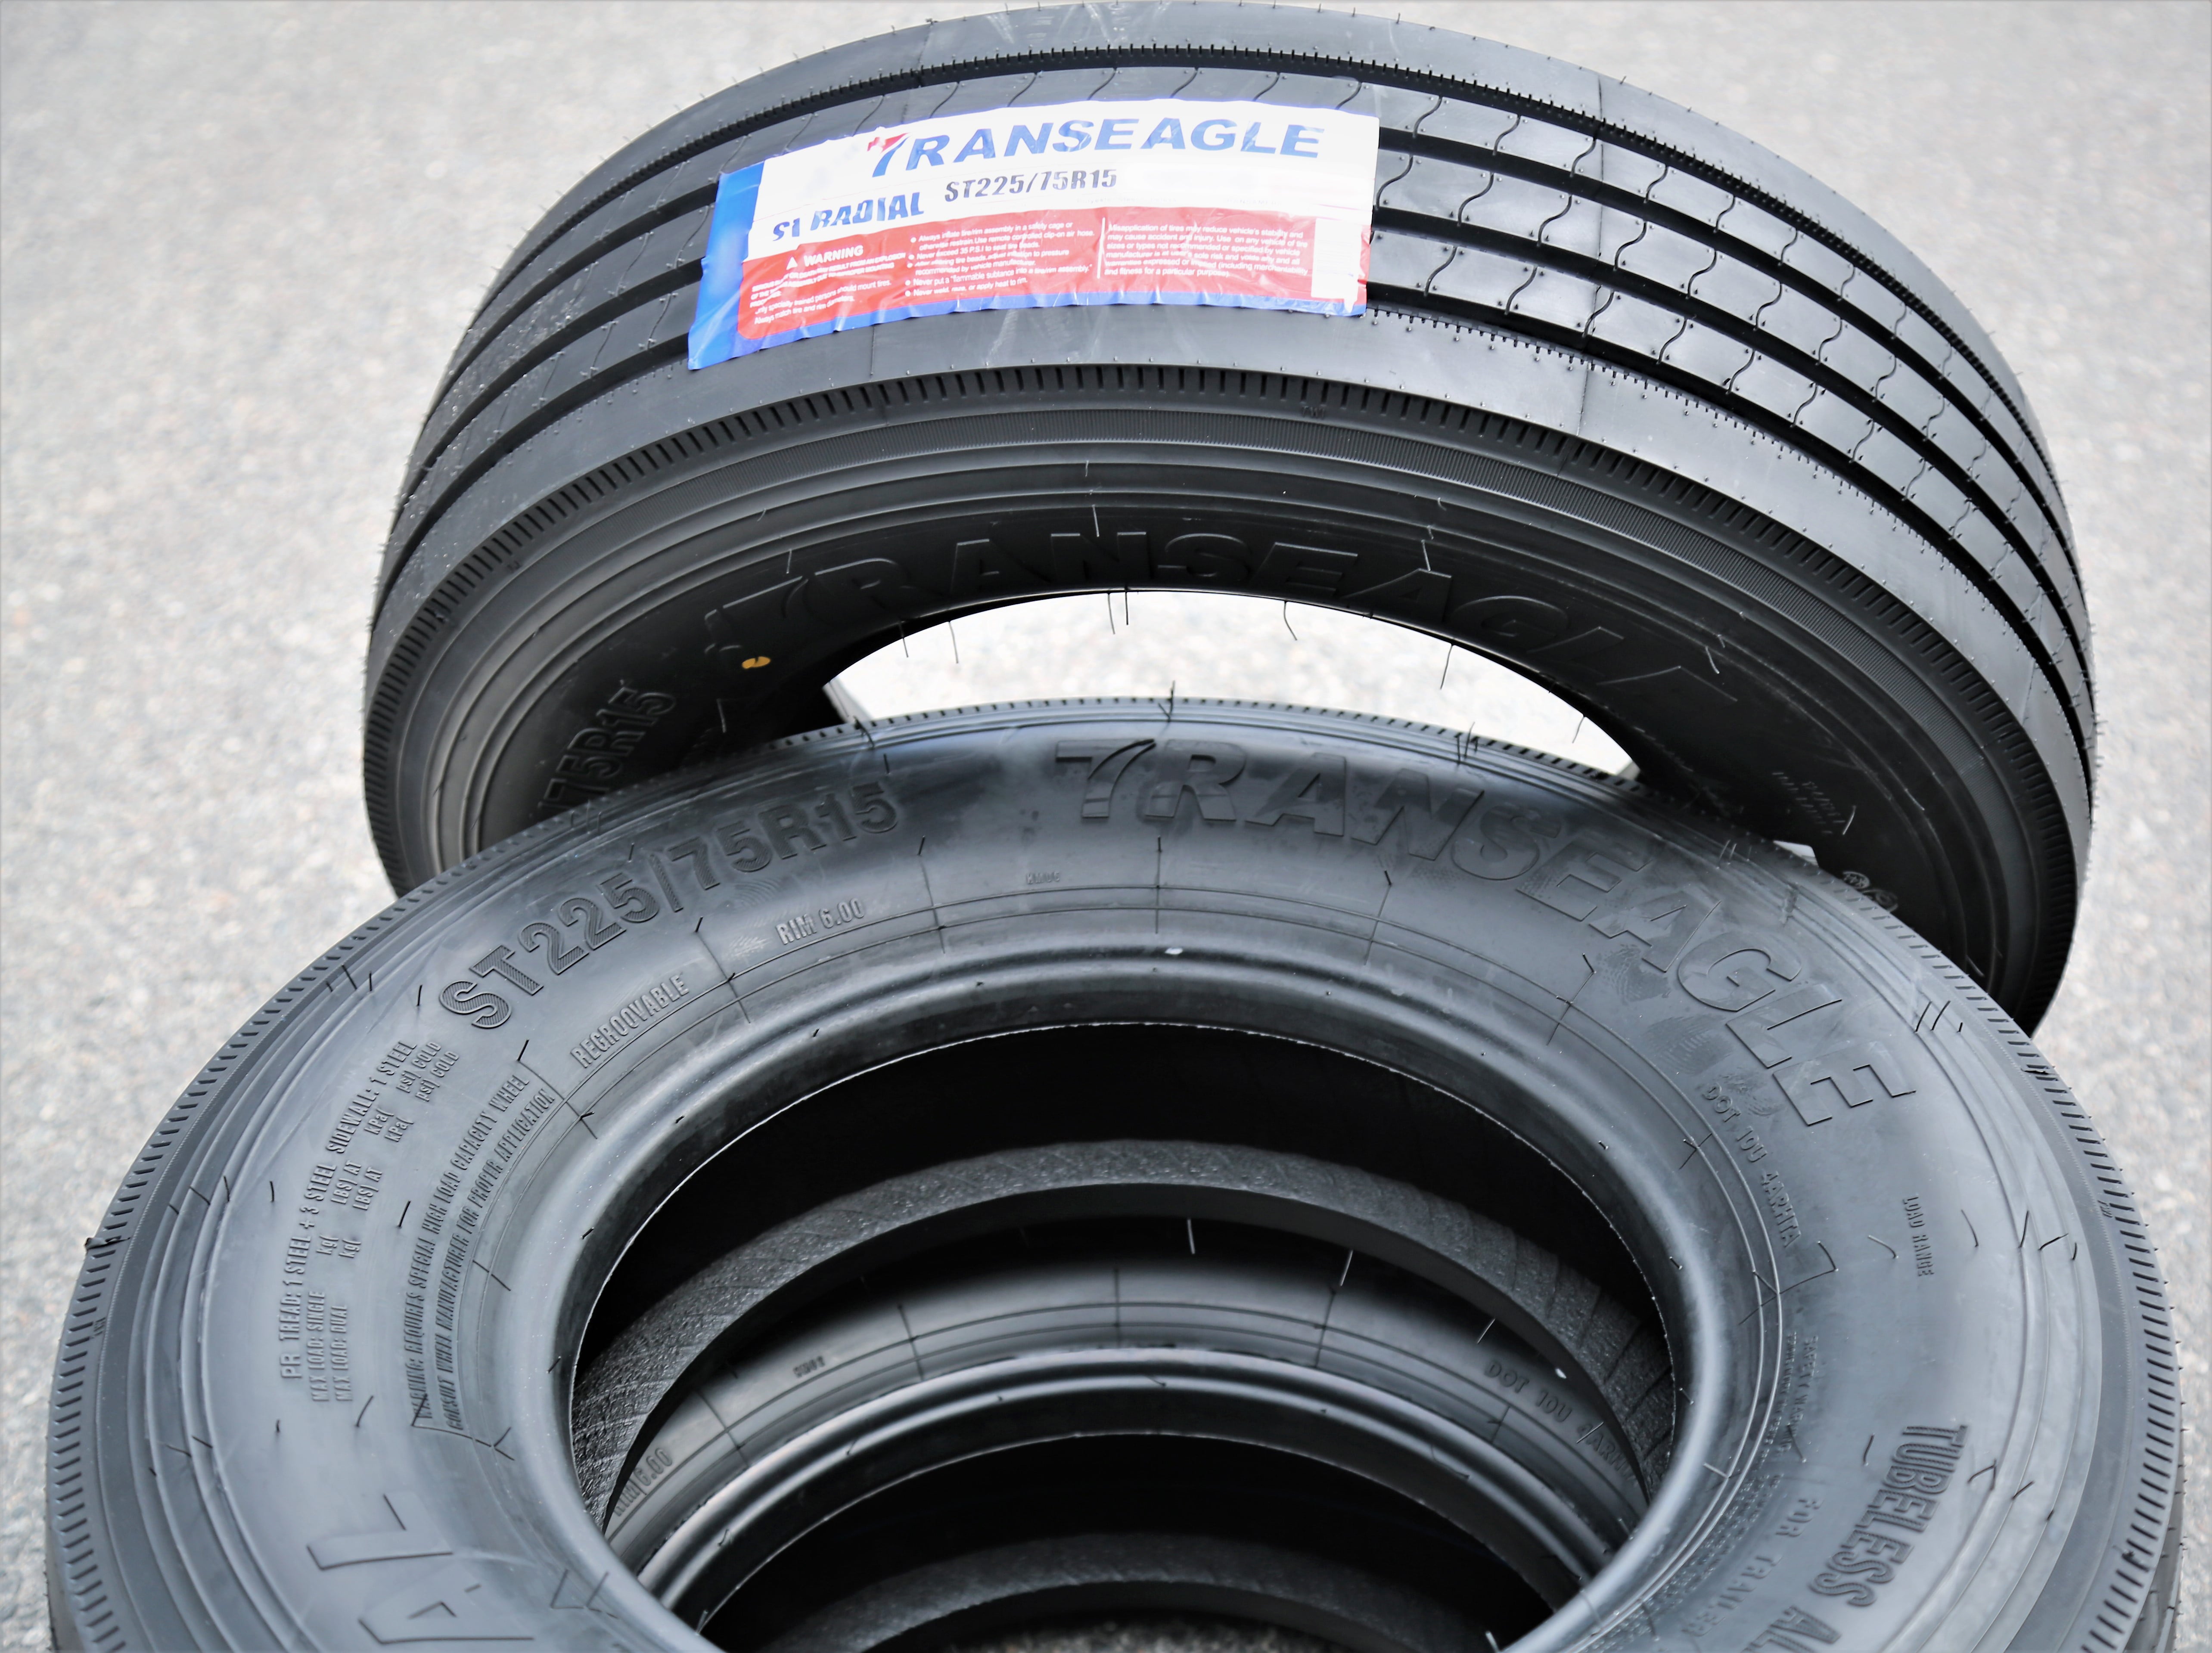 Transeagle All Steel ST Radial 225/75R15 Load F 12 Ply Trailer Tire